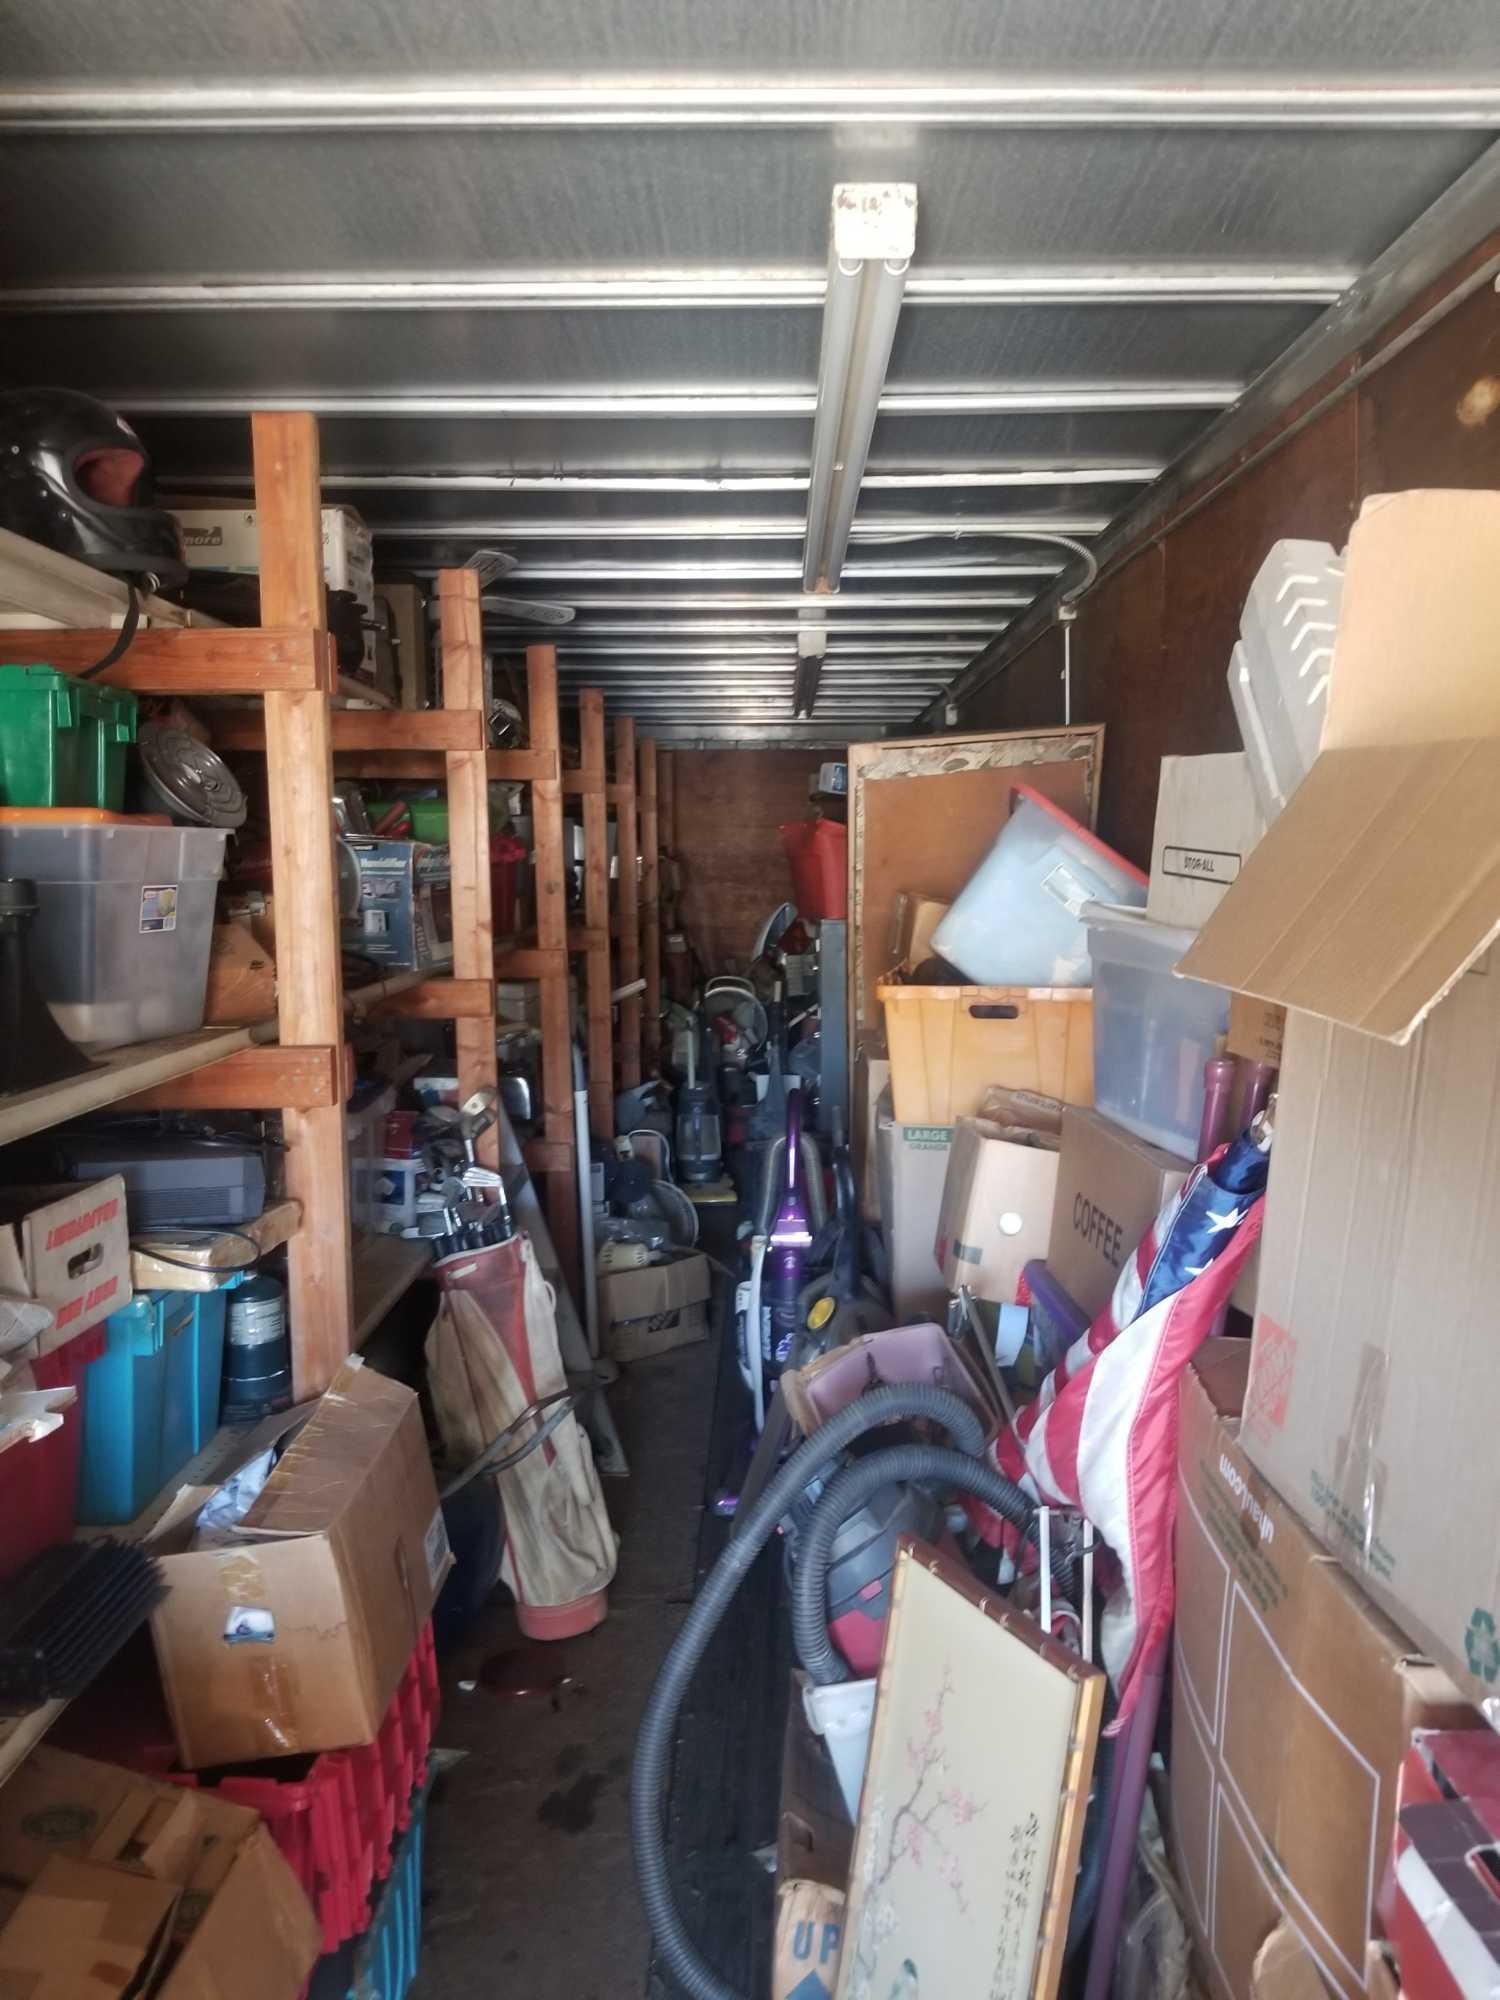 42 Foot Tractor Trailer Full of Contents